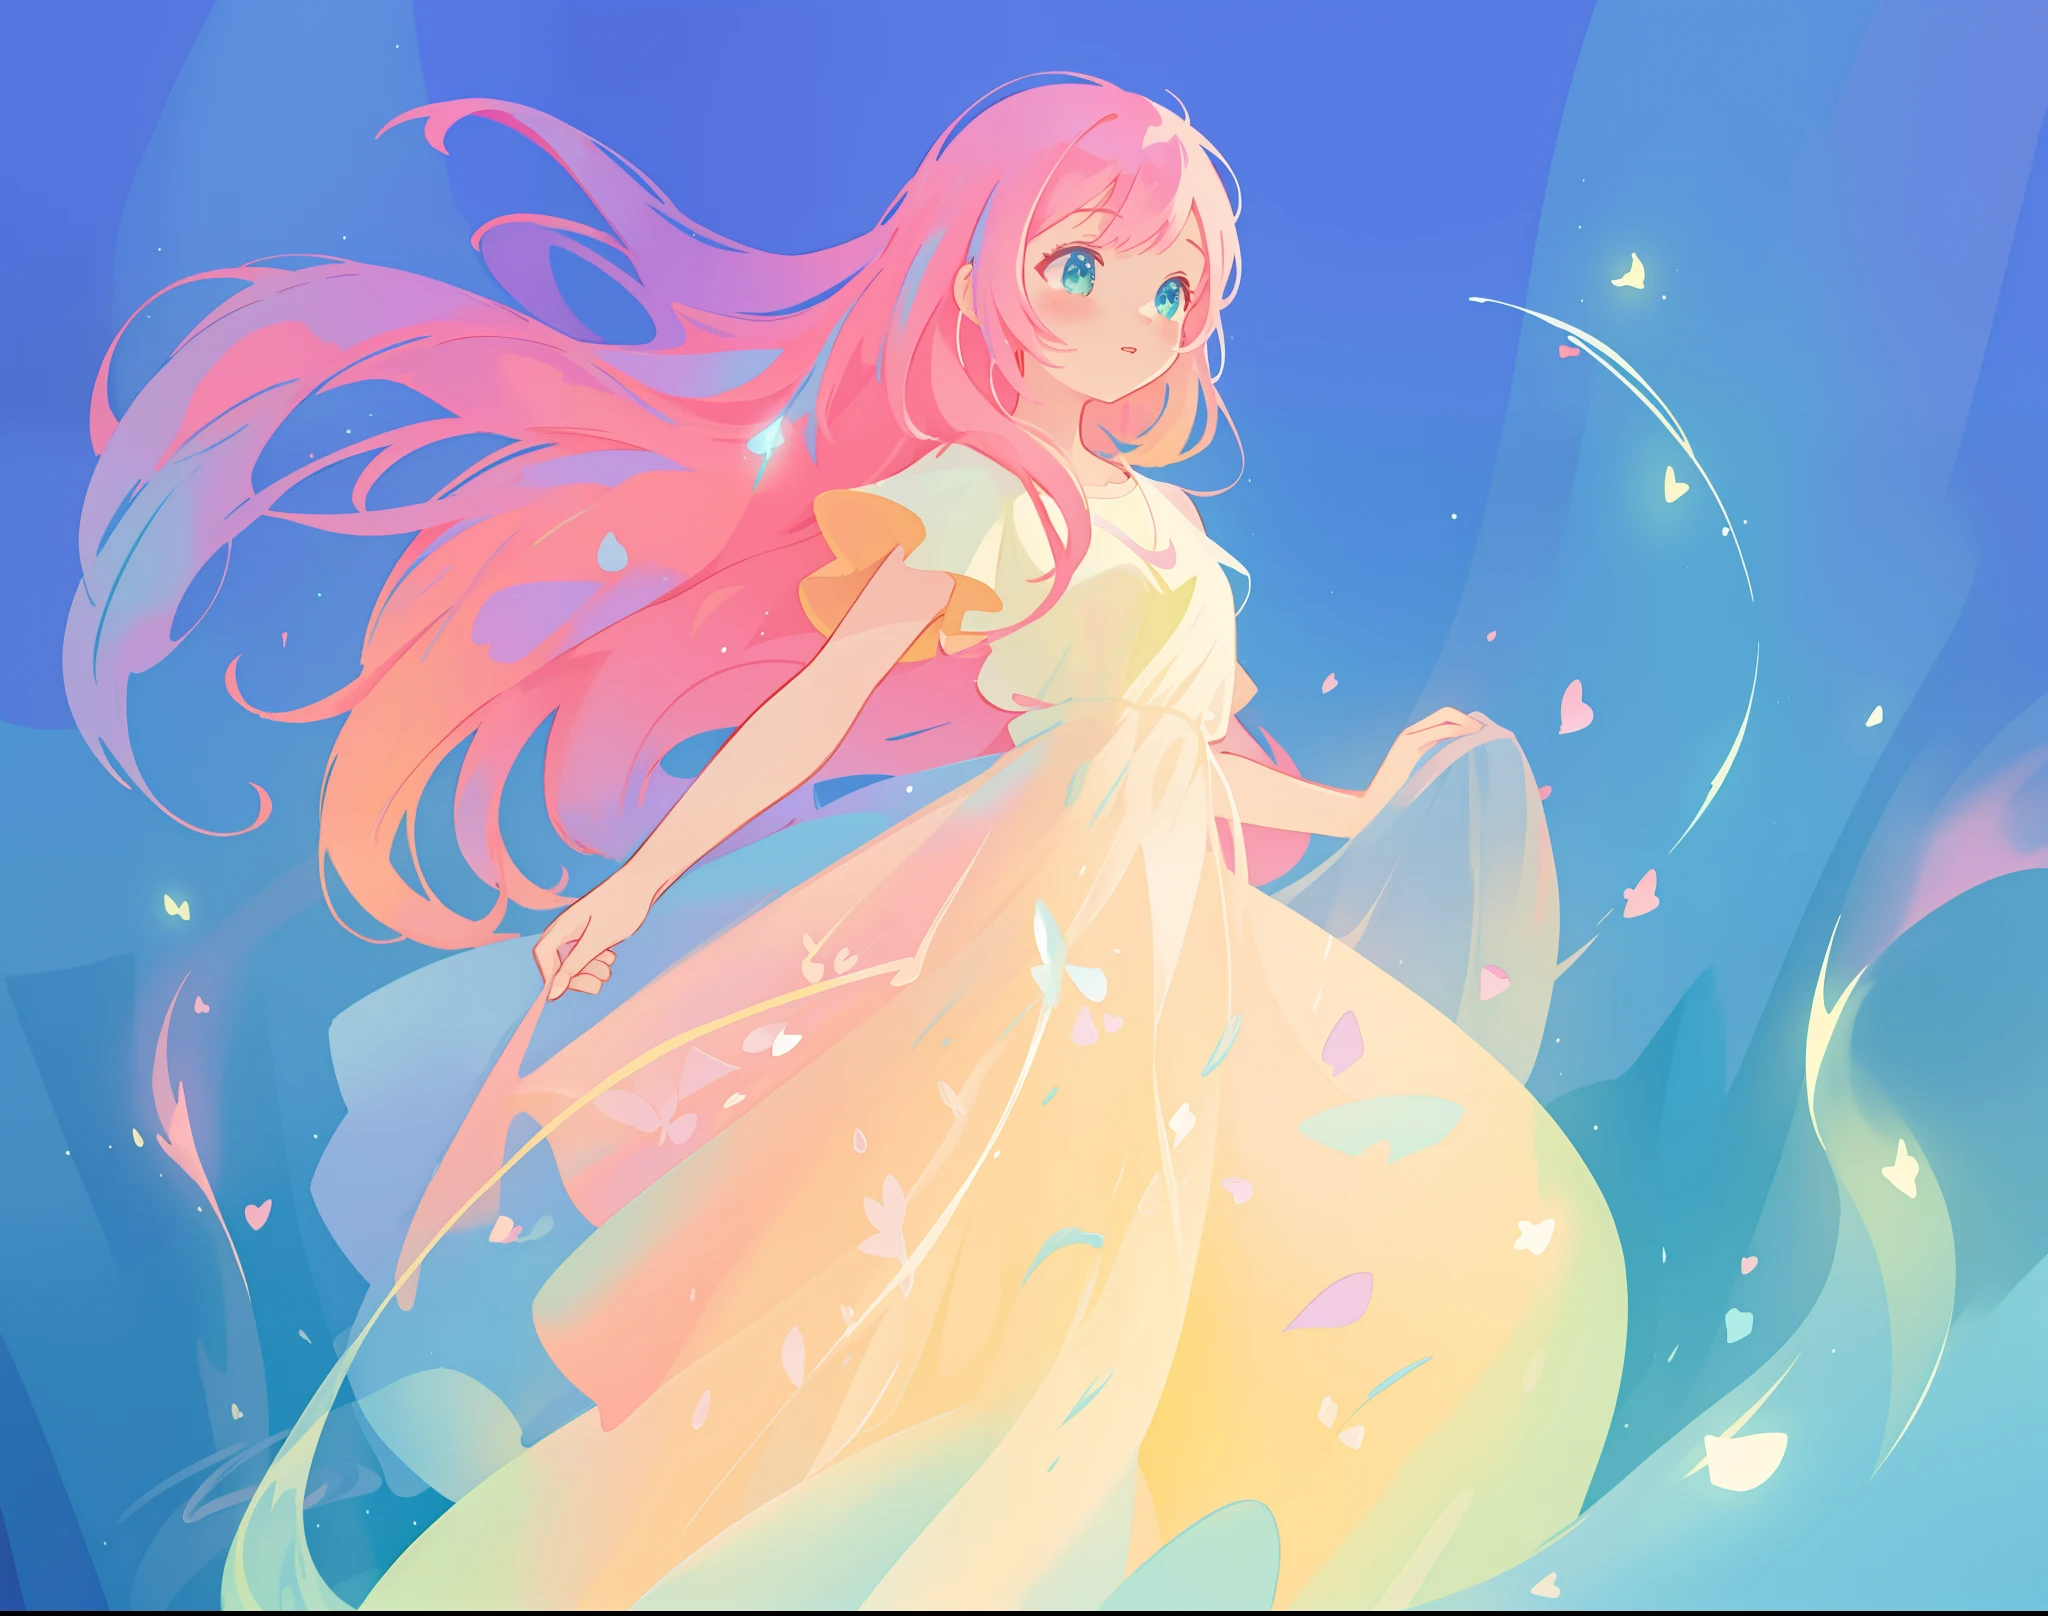 beautiful girl in flowing white dress, vibrant pastel colors, (colorful), magical lights, long flowing colorful pink hair, otherworldly aqua and blue landscape background, inspired by Glen Keane, inspired by Lois van Baarle, disney art style, by Lois van Baarle, glowing aura around her, by Glen Keane, jen bartel, glowing lights! digital painting, flowing glowing hair, glowing flowing hair, beautiful digital illustration, fantasia background, whimsical, magical, fantasy, beautiful face, ((masterpiece, best quality)), intricate details, highly detailed, sharp focus, 8k resolution, sparkling detailed eyes, liquid watercolor